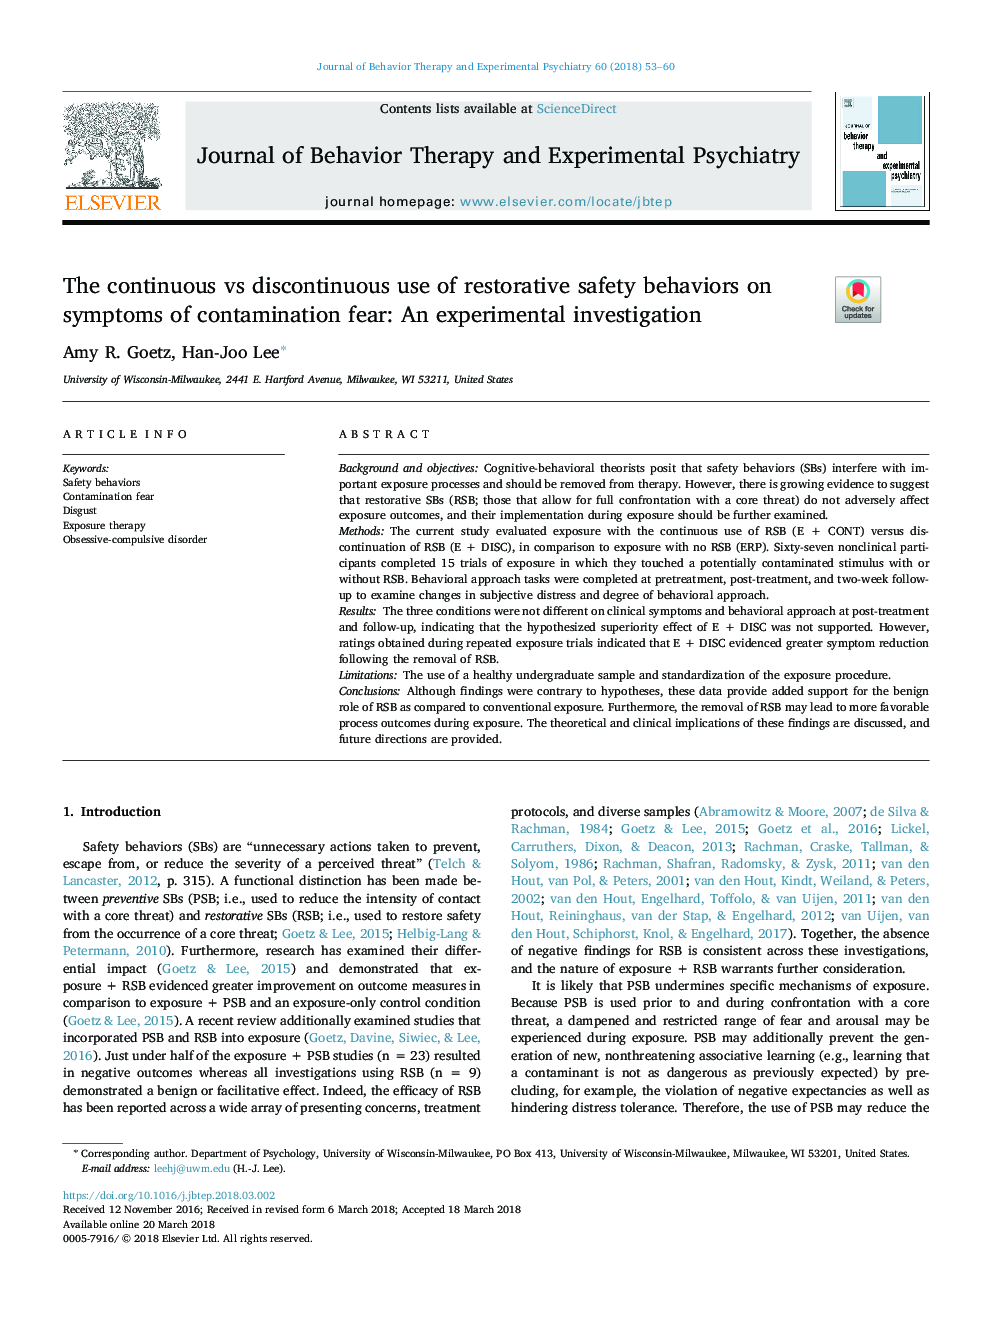 The continuous vs discontinuous use of restorative safety behaviors on symptoms of contamination fear: An experimental investigation